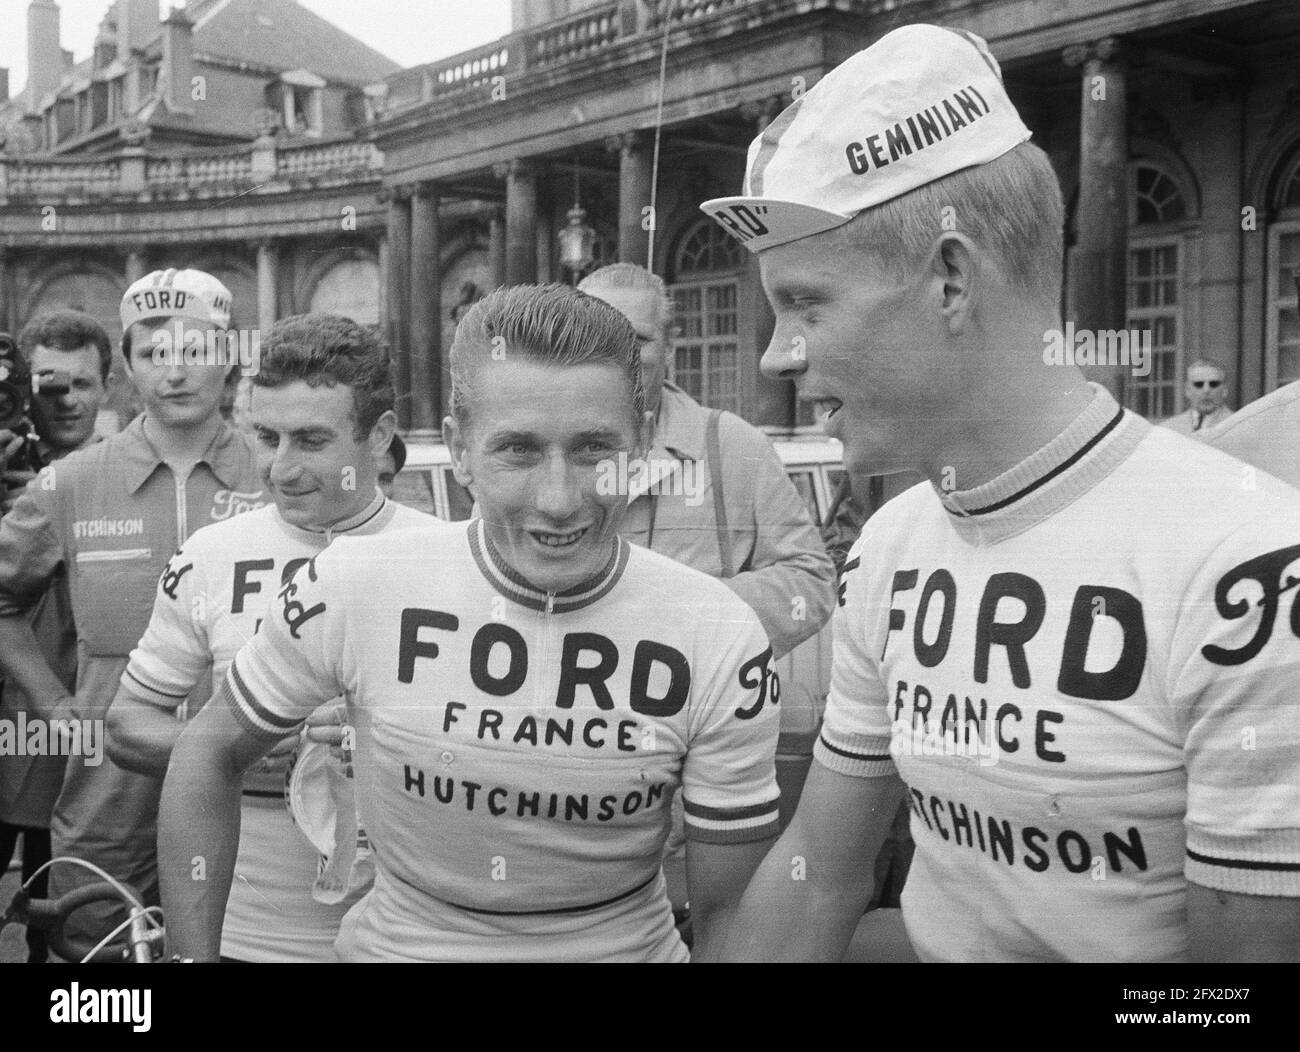 Lucien Aimar, Jacques Anquetil and Arie den Hartog, Tour de France 1966 (cropped), The Netherlands, 20th century press agency photo, news to remember, documentary, historic photography 1945-1990, visual stories, human history of the Twentieth Century, capturing moments in time Stock Photo